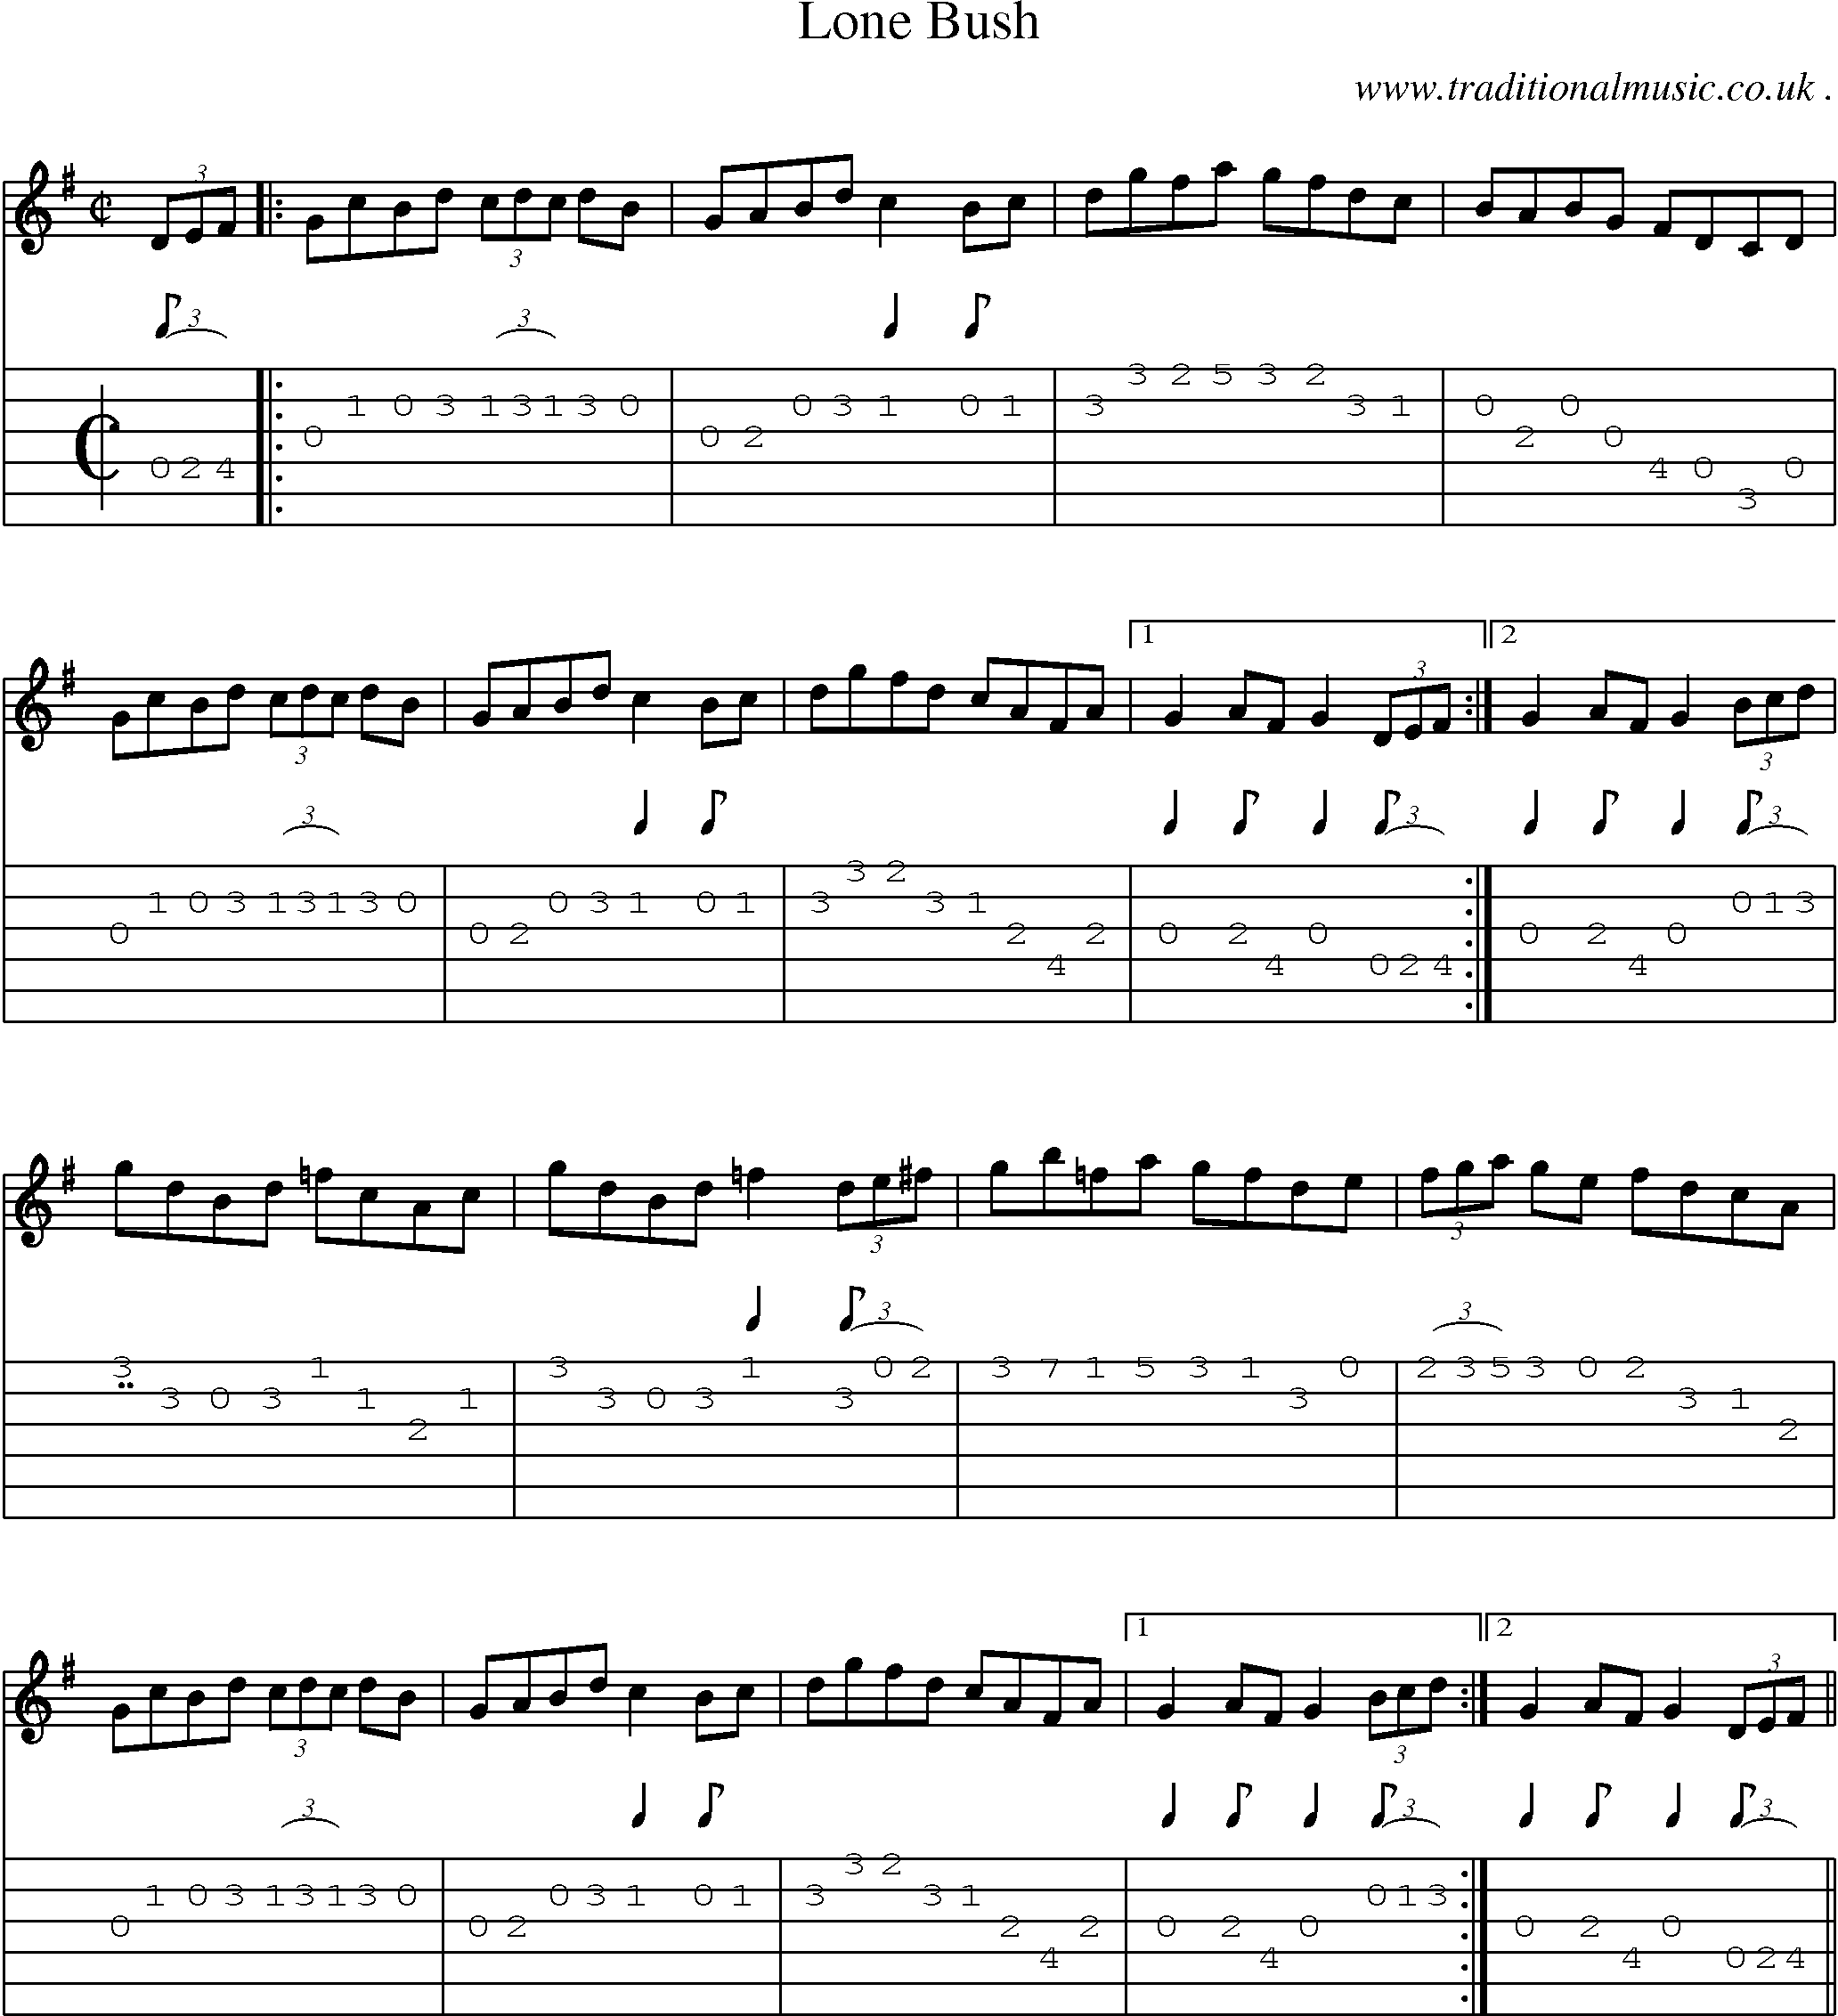 Sheet-Music and Guitar Tabs for Lone Bush